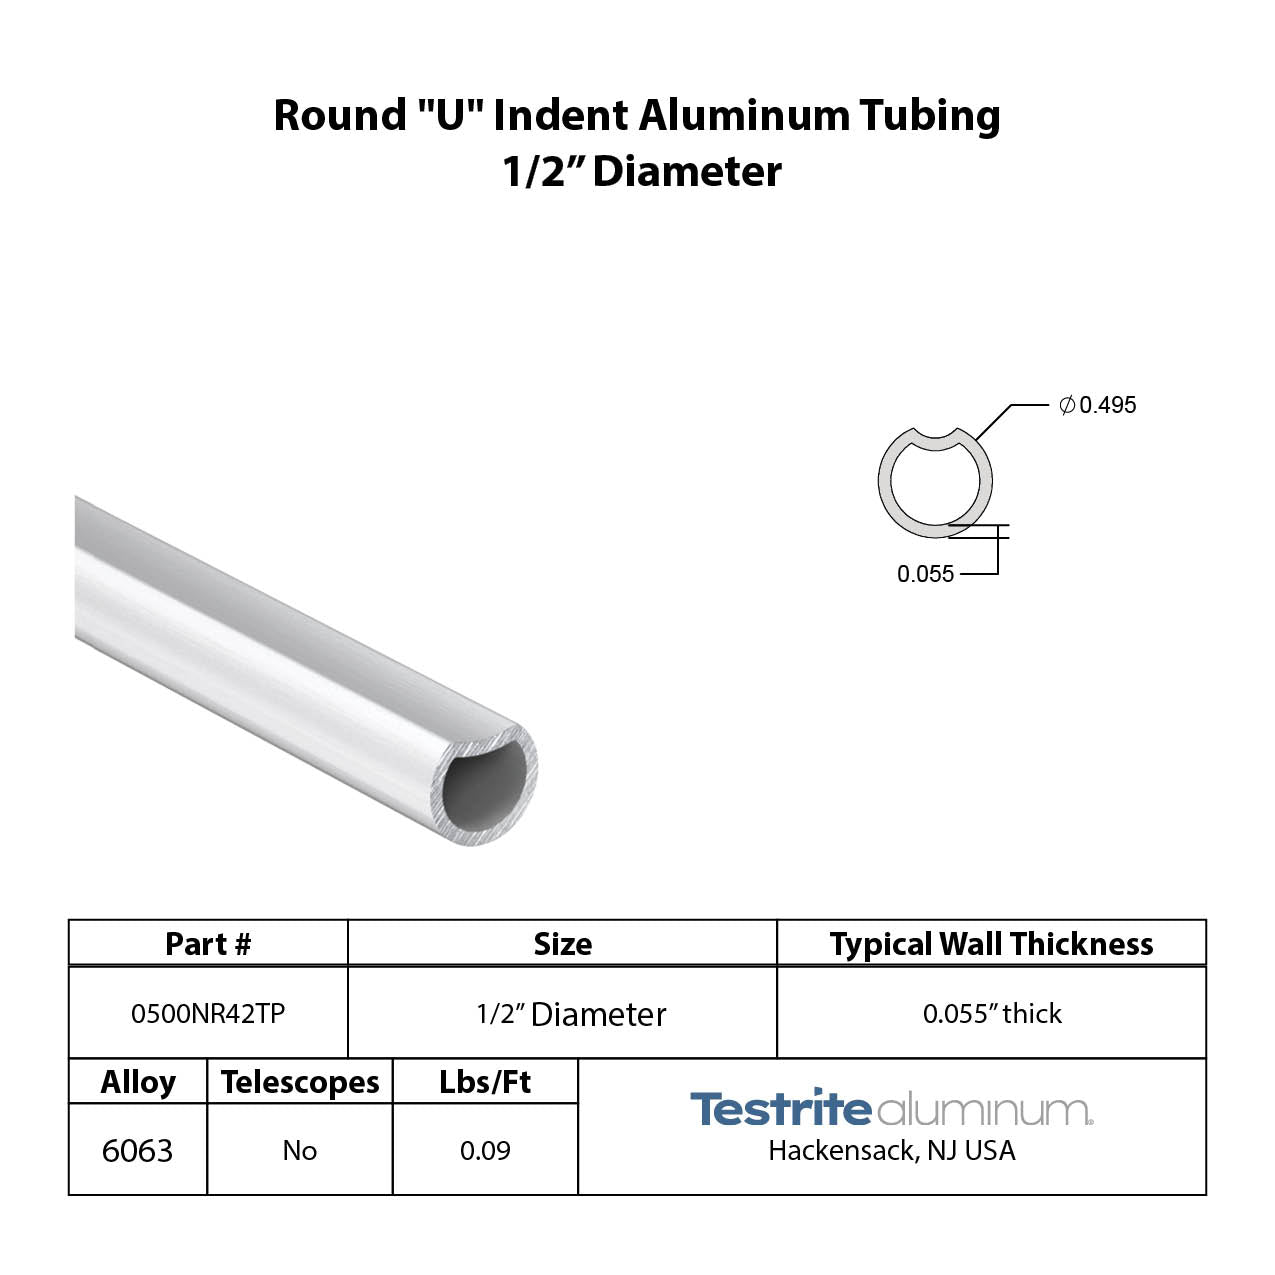 Specification sheet for 1/2" OD round U indent aluminum tube index key aluminum tubing .5 in diameter spec sheet thin wall 0500NR42TP